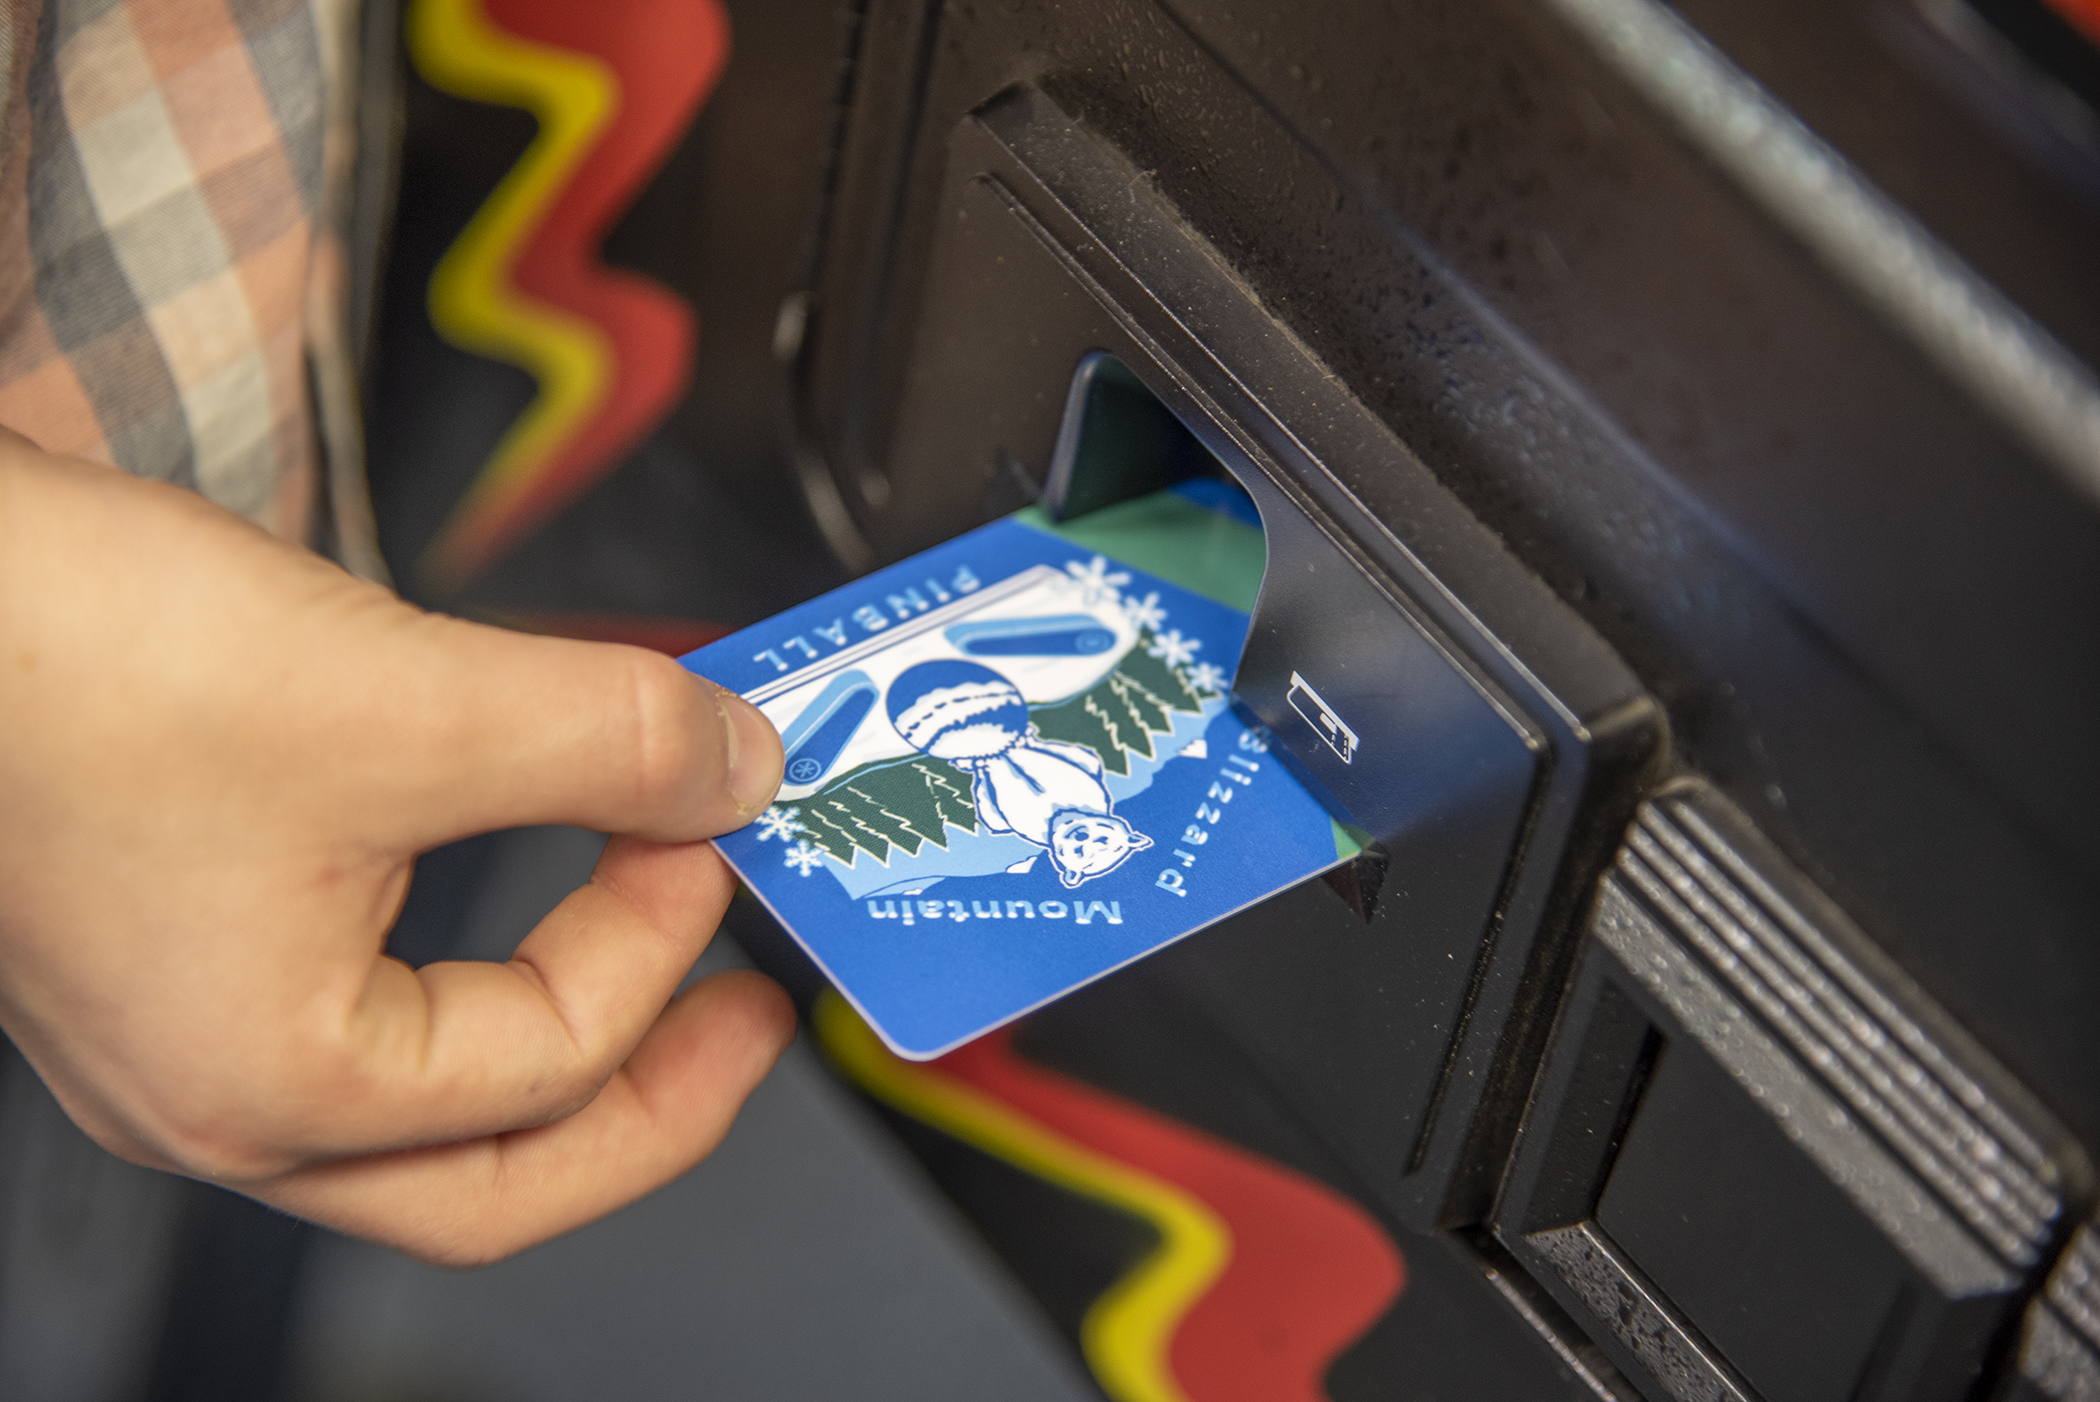 Unlimited Play Swipe Cards at Blizzard Mountain Pinball